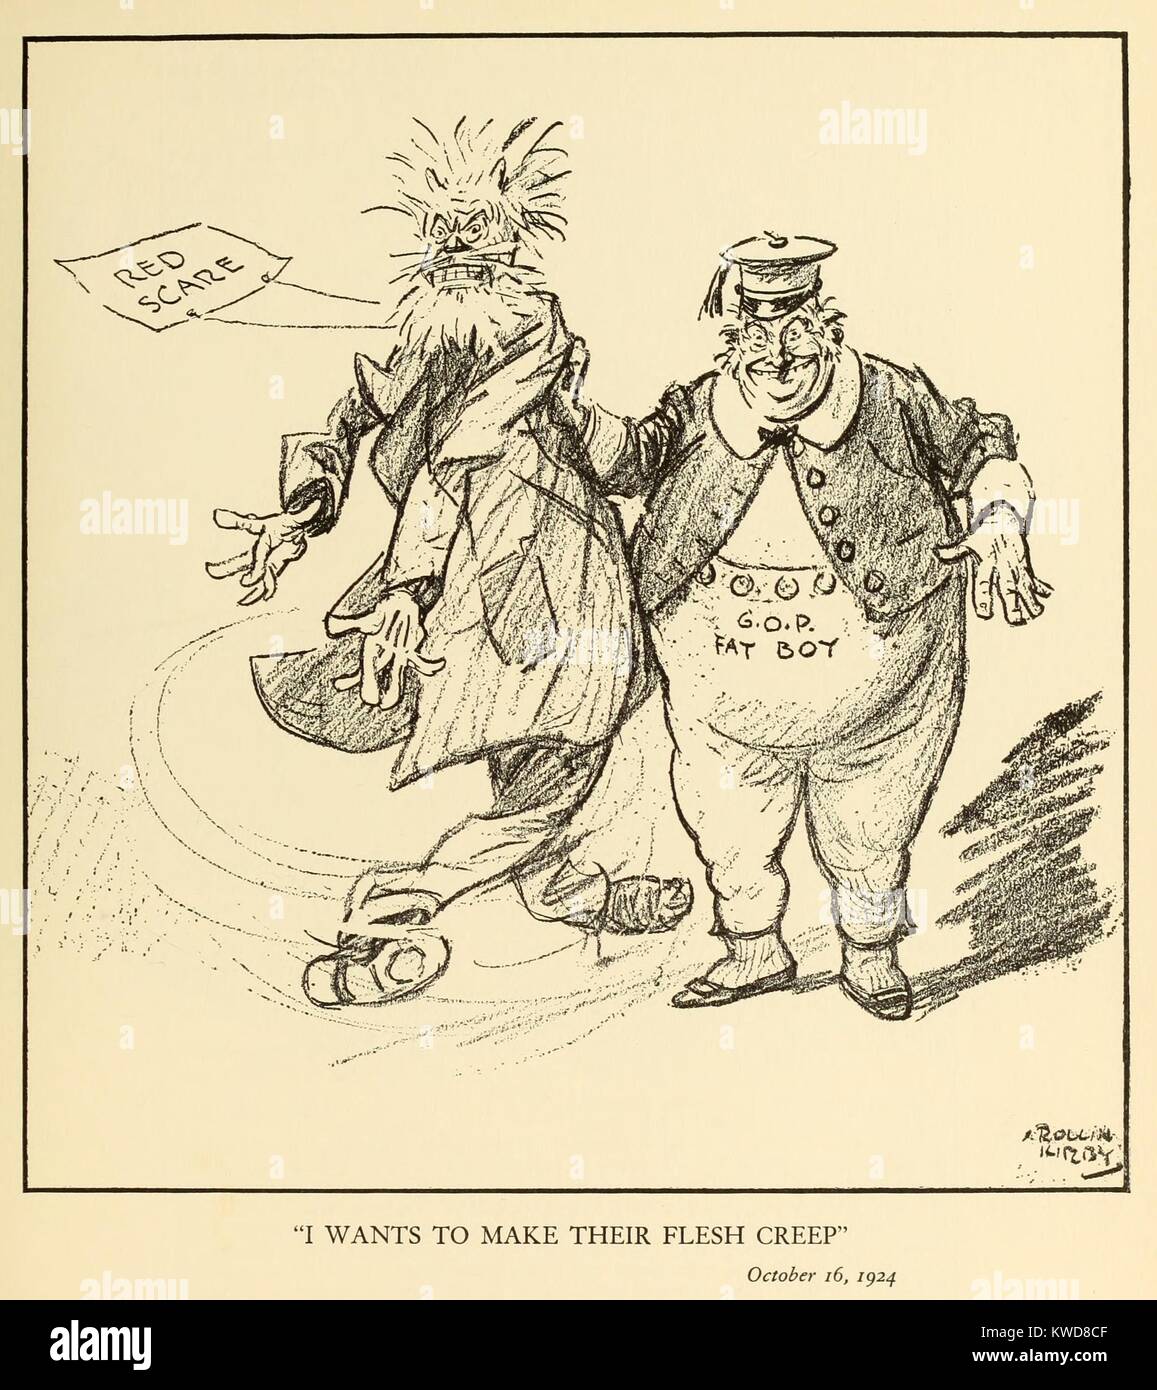 I WANTS TO MAKE THEIR FLESH CREEP. Political cartoon showing a 'G.O.P. Fatboy' waving a threatening puppet representing the Red Scare. By New York World cartoonist, Kirby Rollin, Oct. 24, 1920. (BSLOC 2015 17 242) Stock Photo